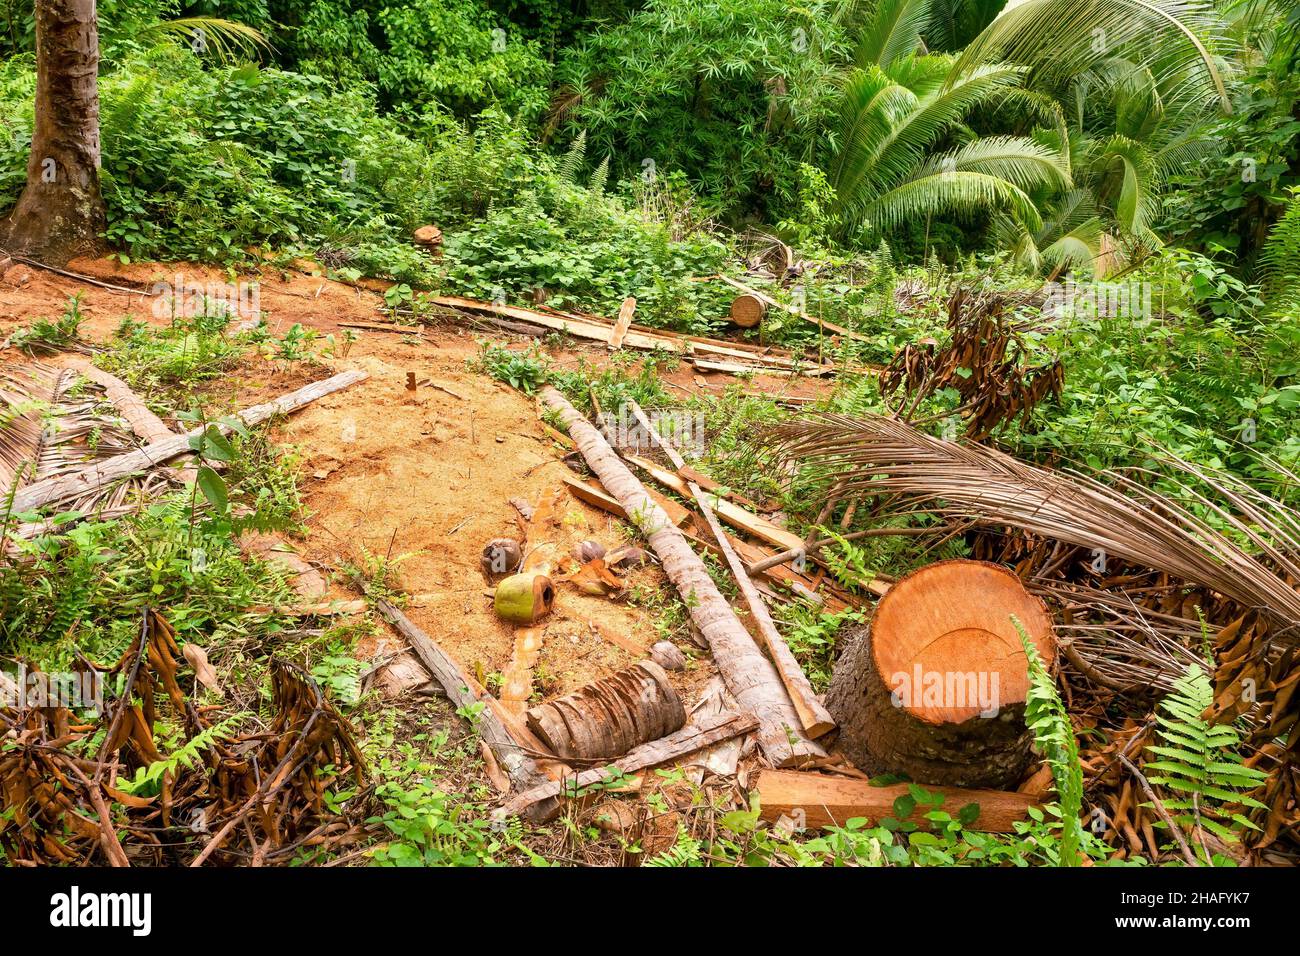 High angle view of a stump, red sawdust, bark, and debris from the recent cutting of a coconut palm tree in a lush green forest in the Philippines, to Stock Photo